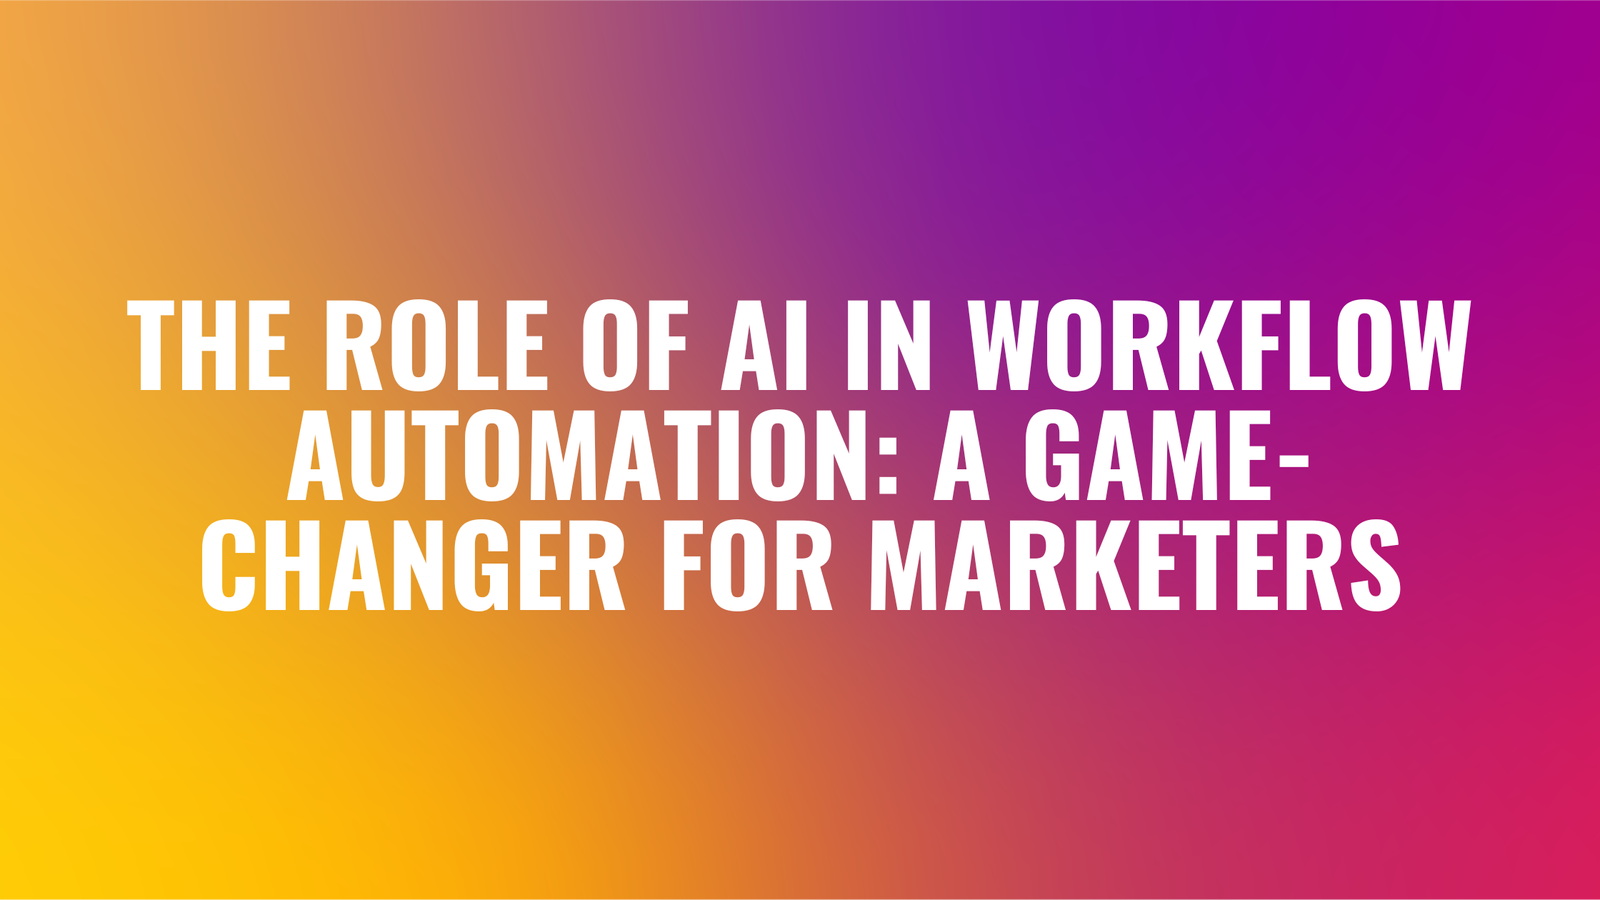 The Role of AI in Workflow Automation: A Game-Changer for Marketers